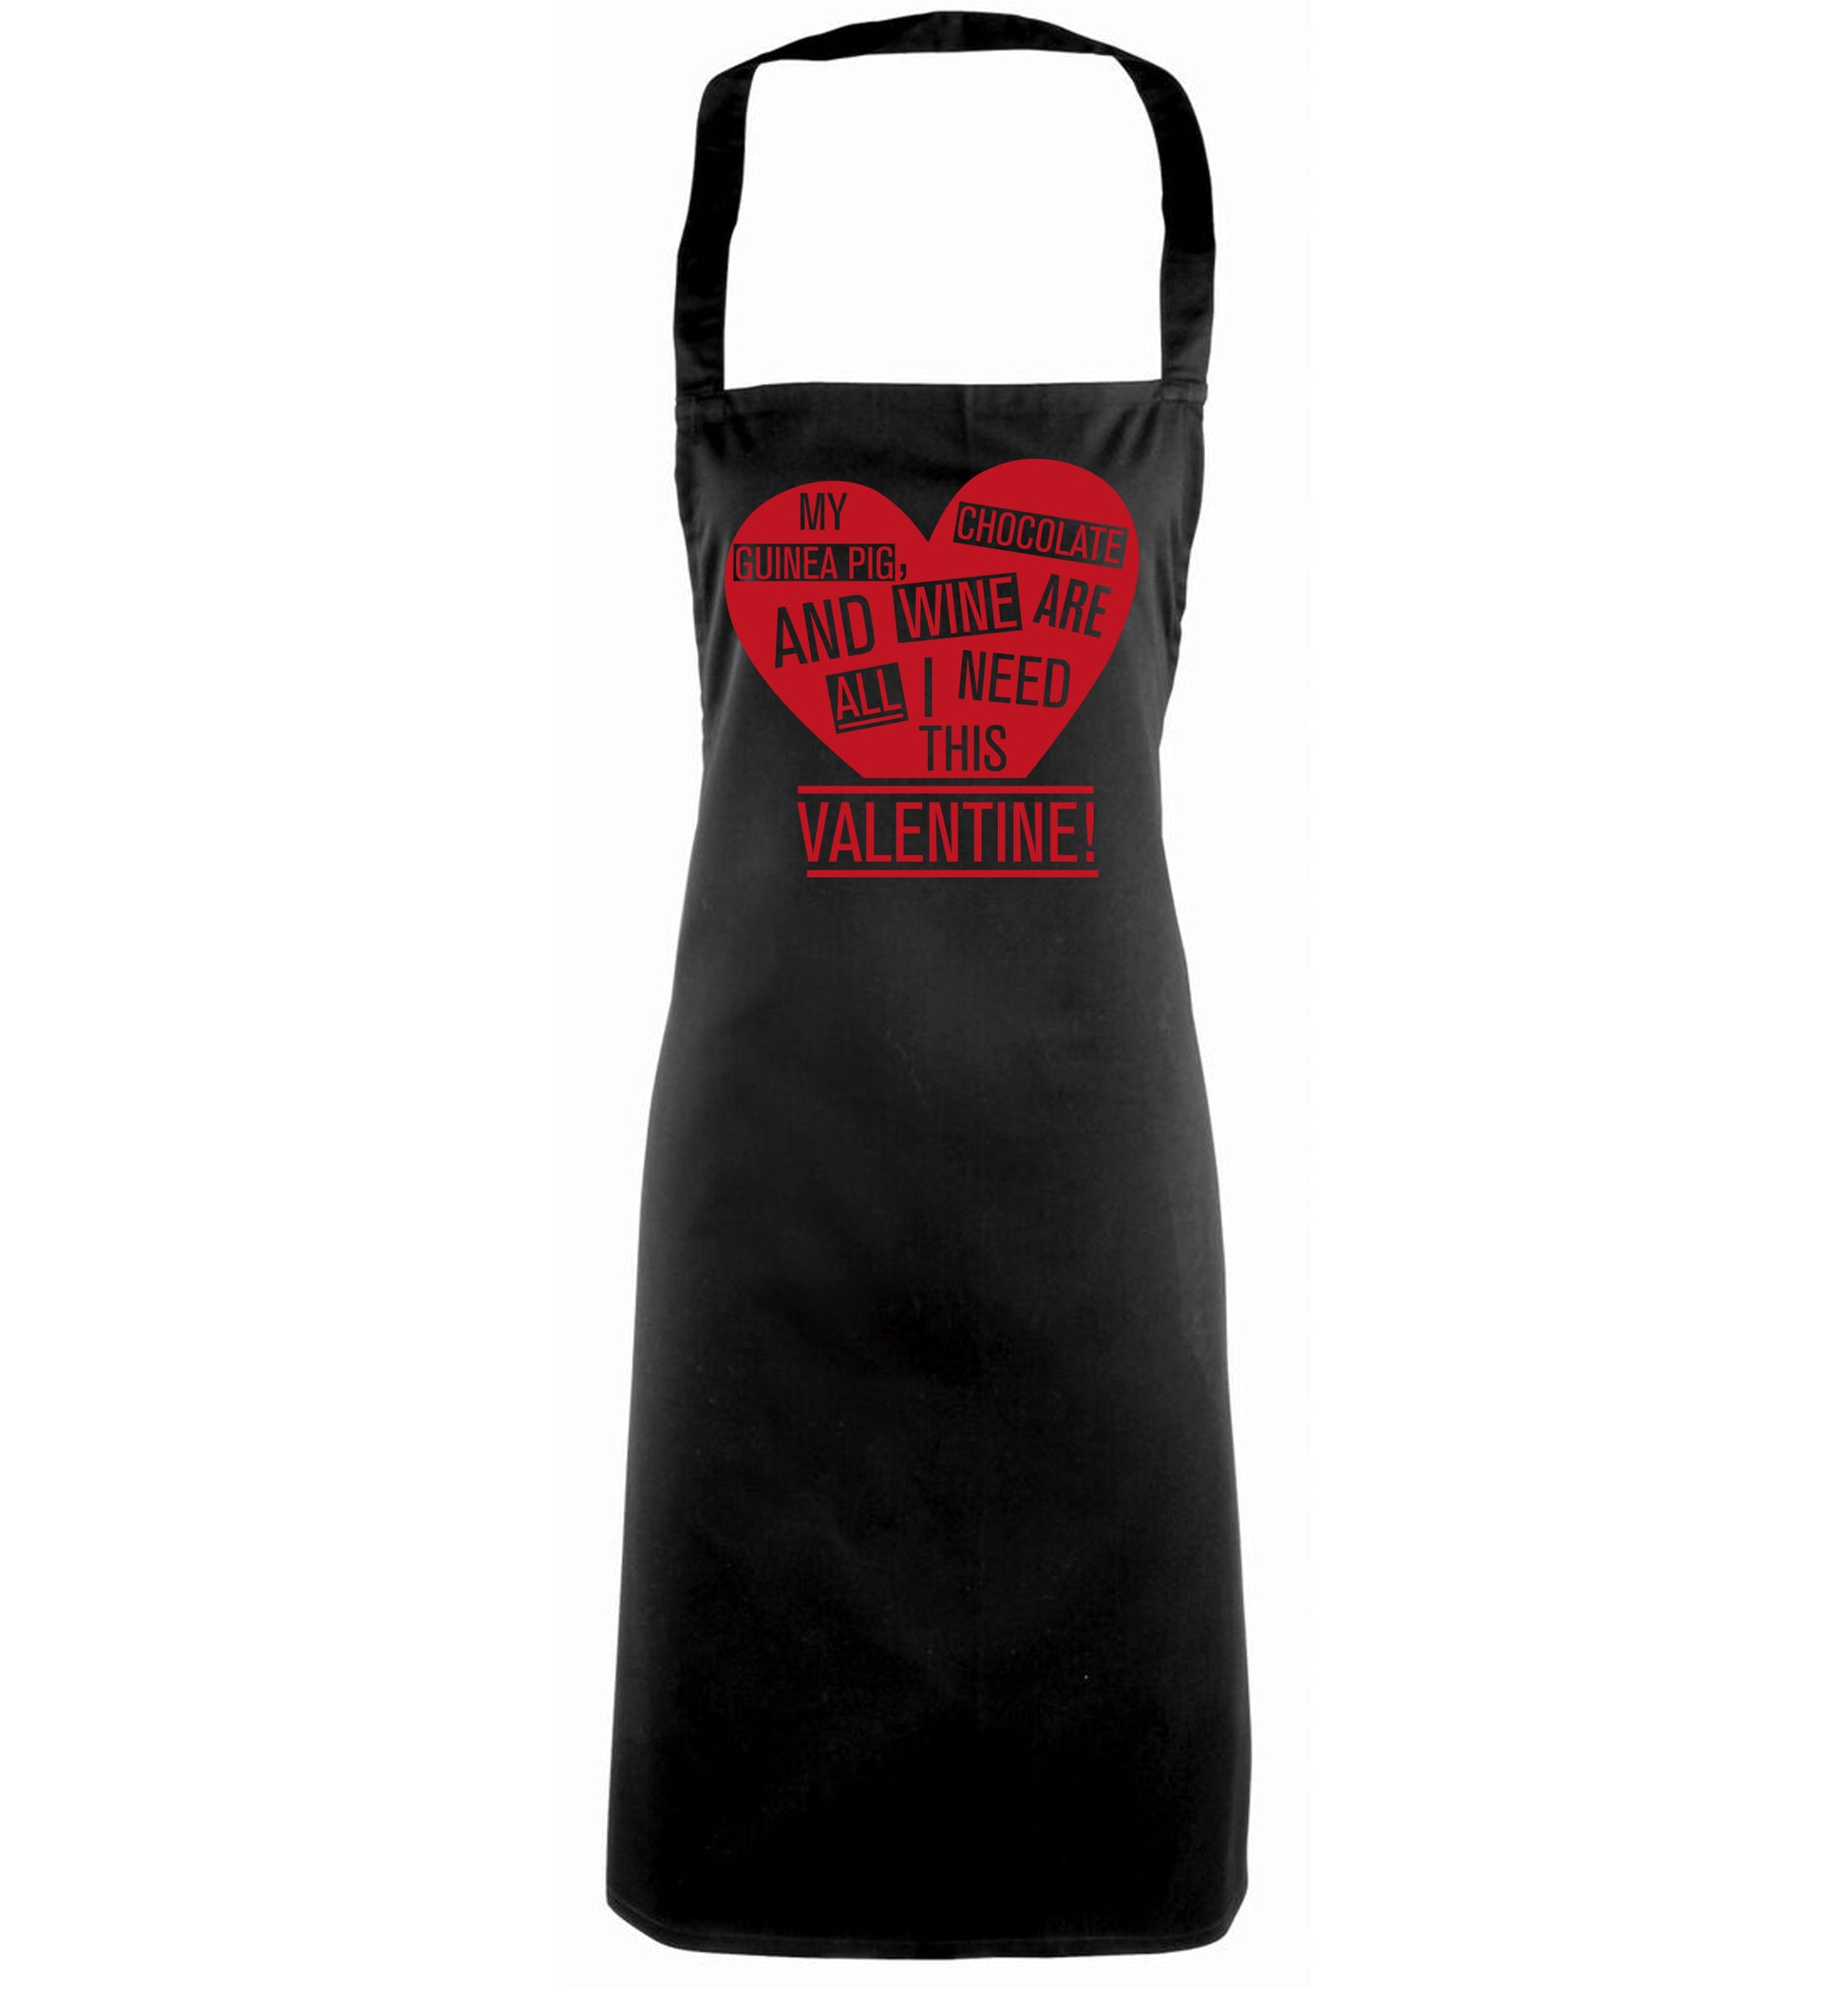 My guinea pig, chocolate and wine are all I need this valentine! black apron